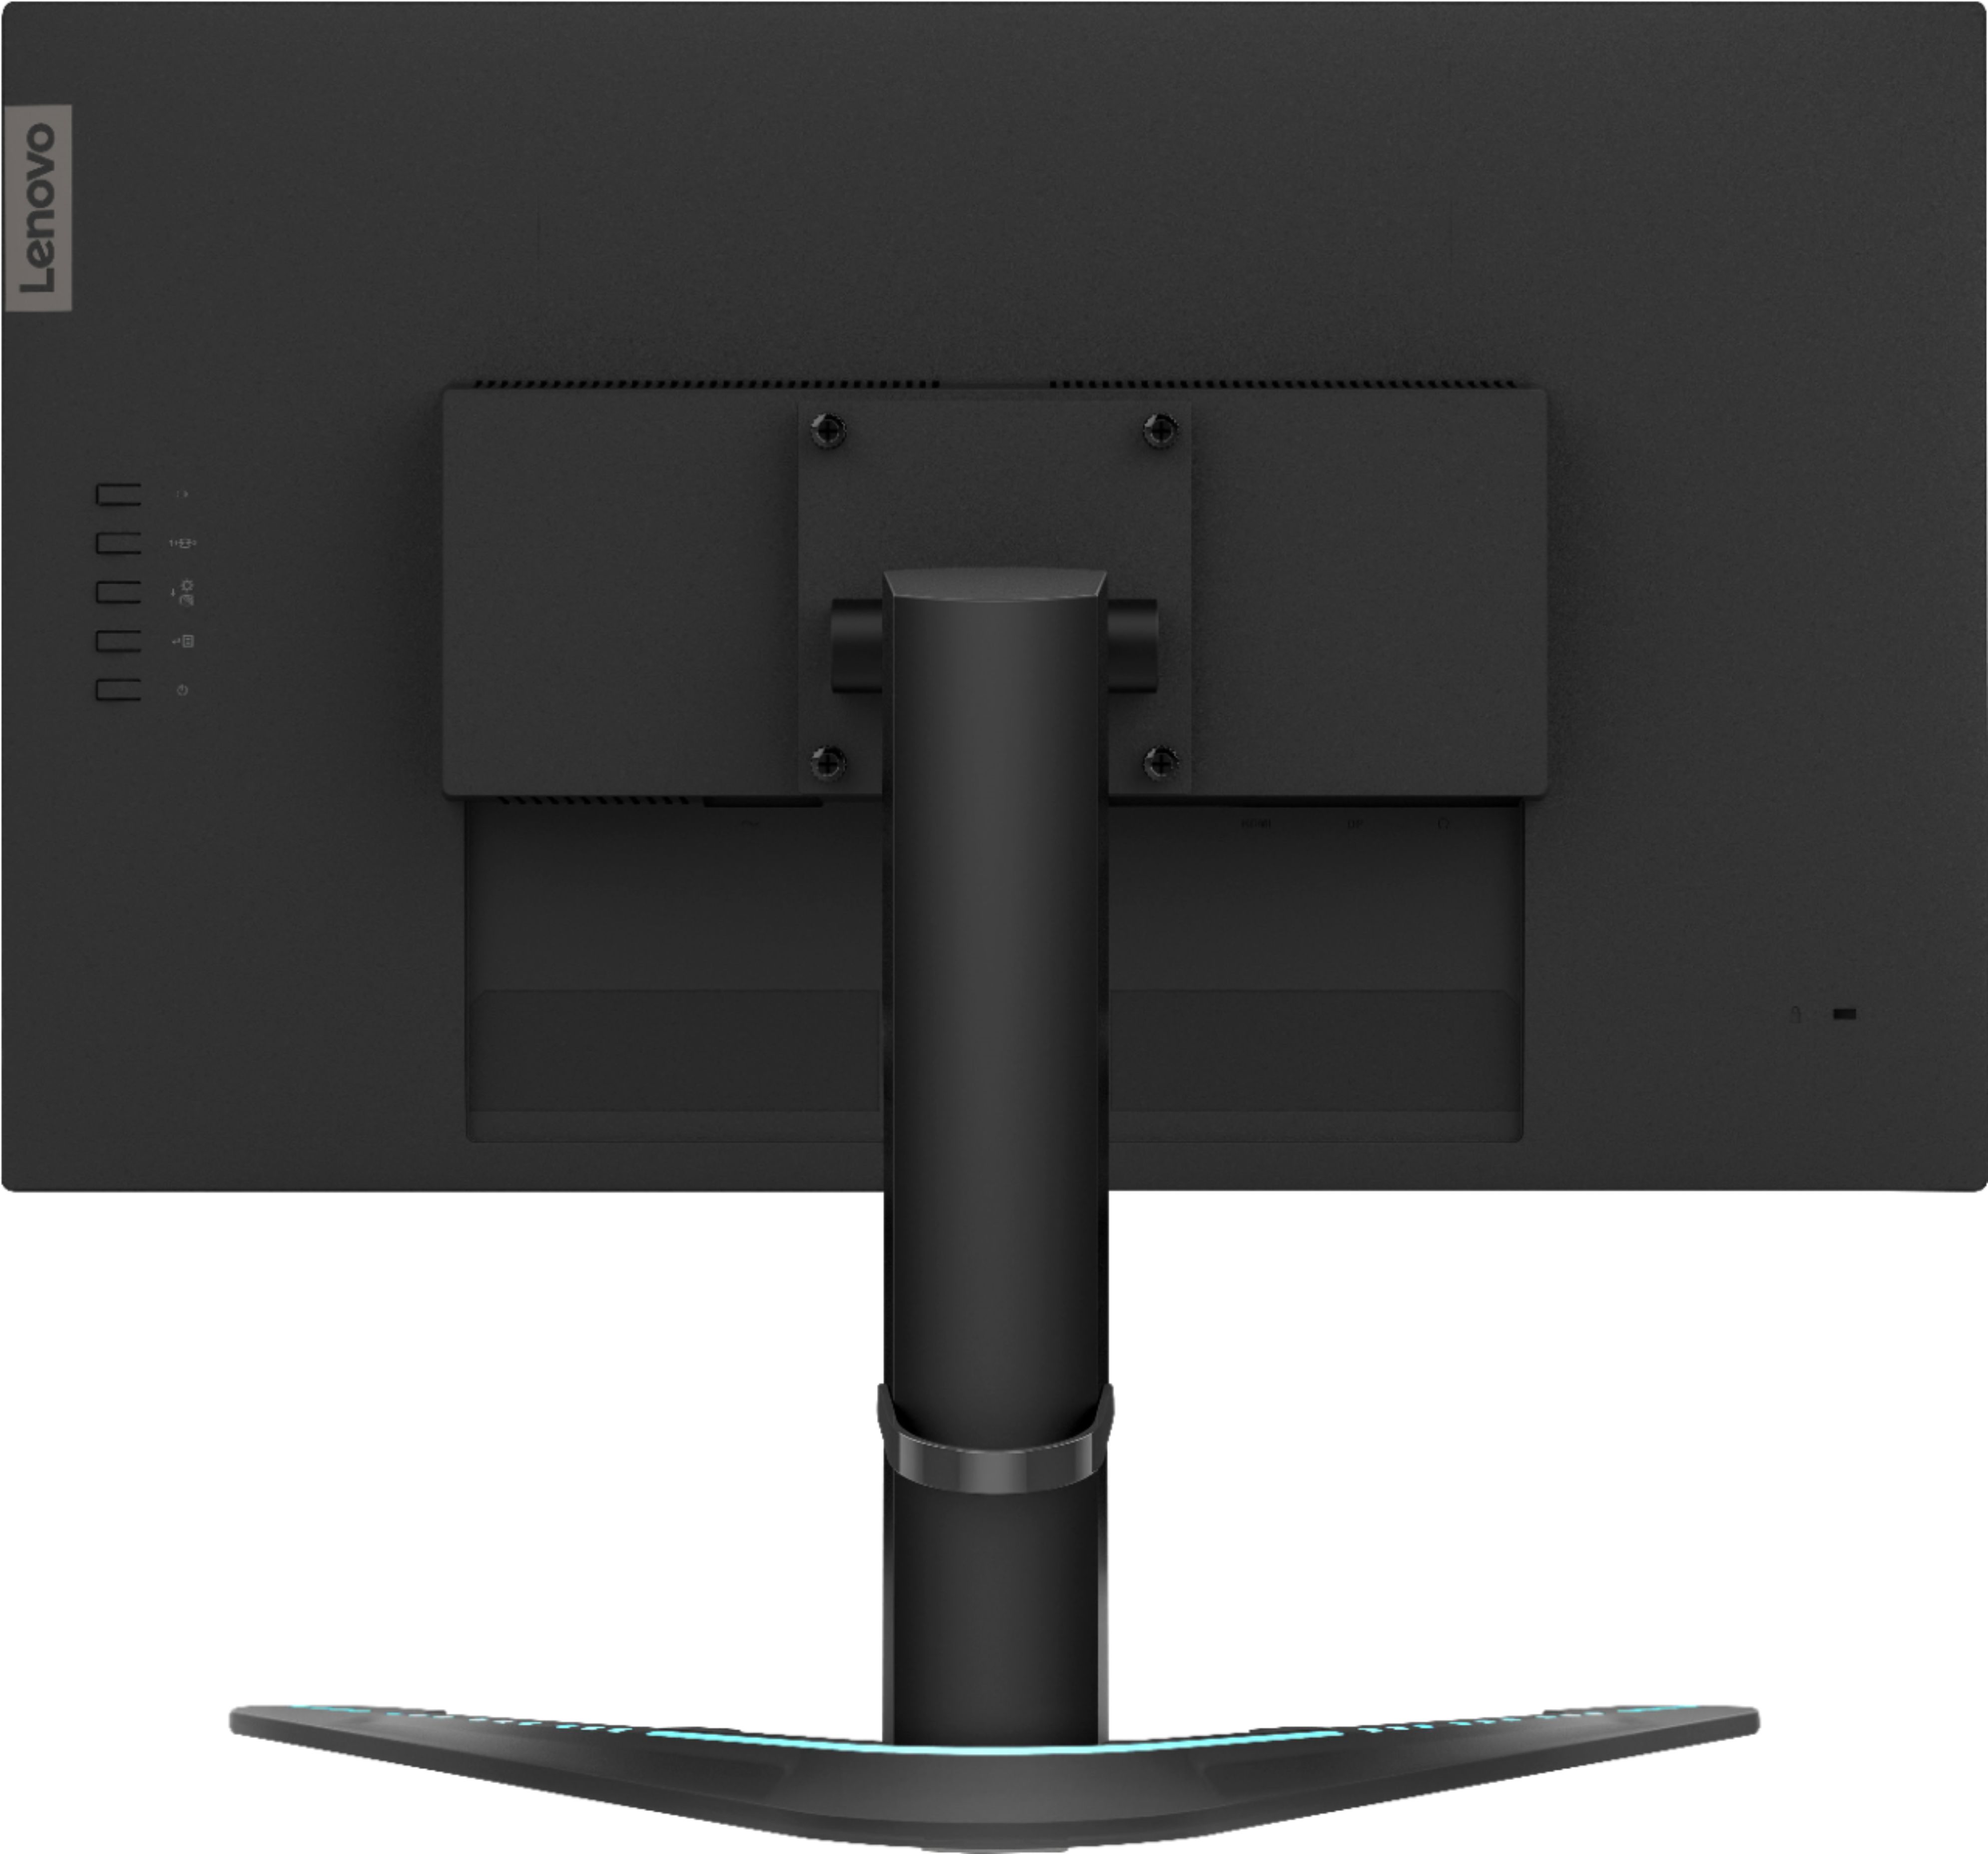 Back View: Lenovo G27-20 27" IPS LED FHD G-SYNC Compatible FreeSync Gaming Monitor Height Adjustable (DisplayPort, HDMI) - Black